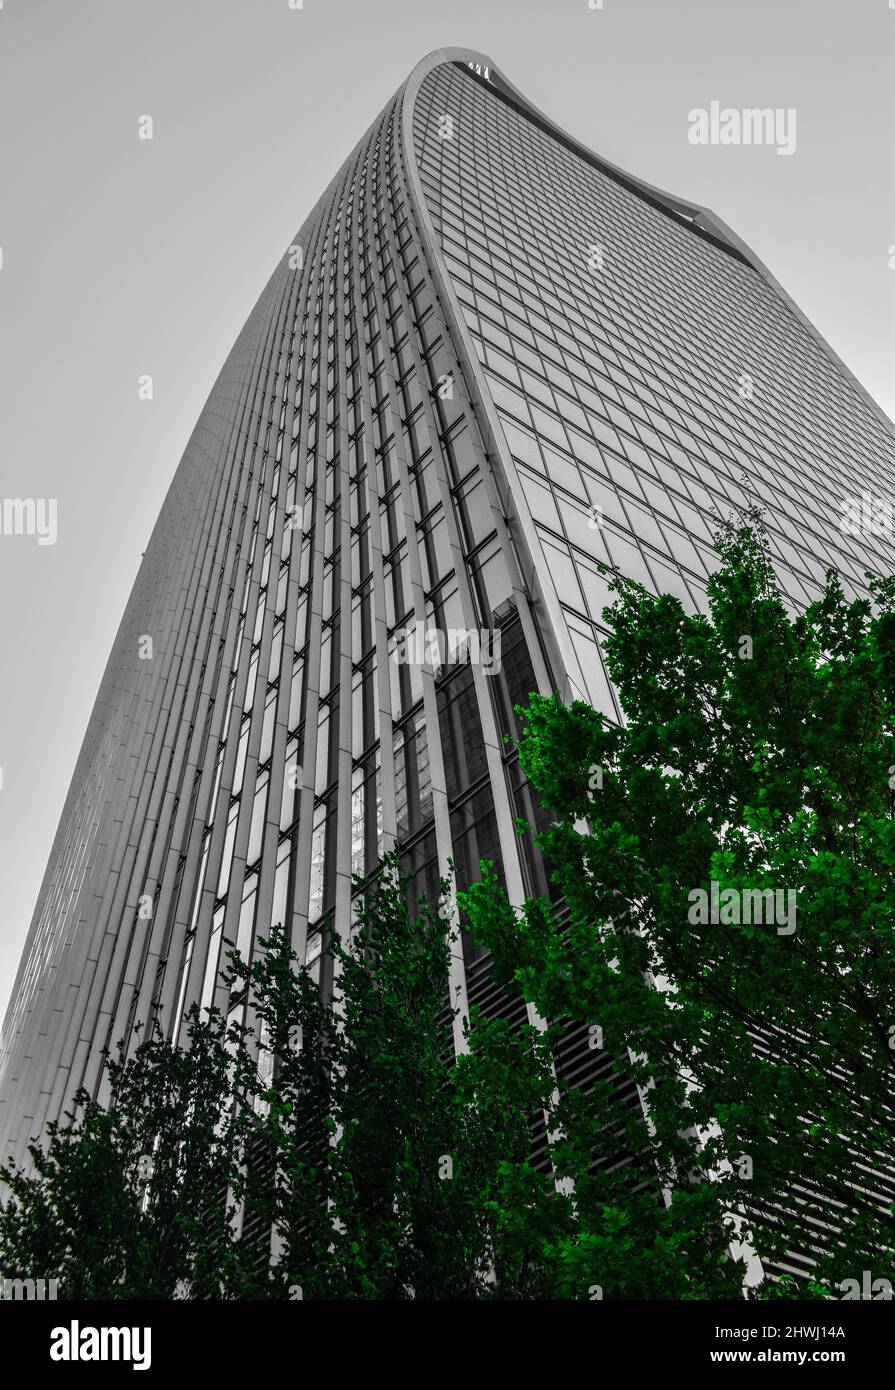 Building skyscraper curve shape line with trees Stock Photo